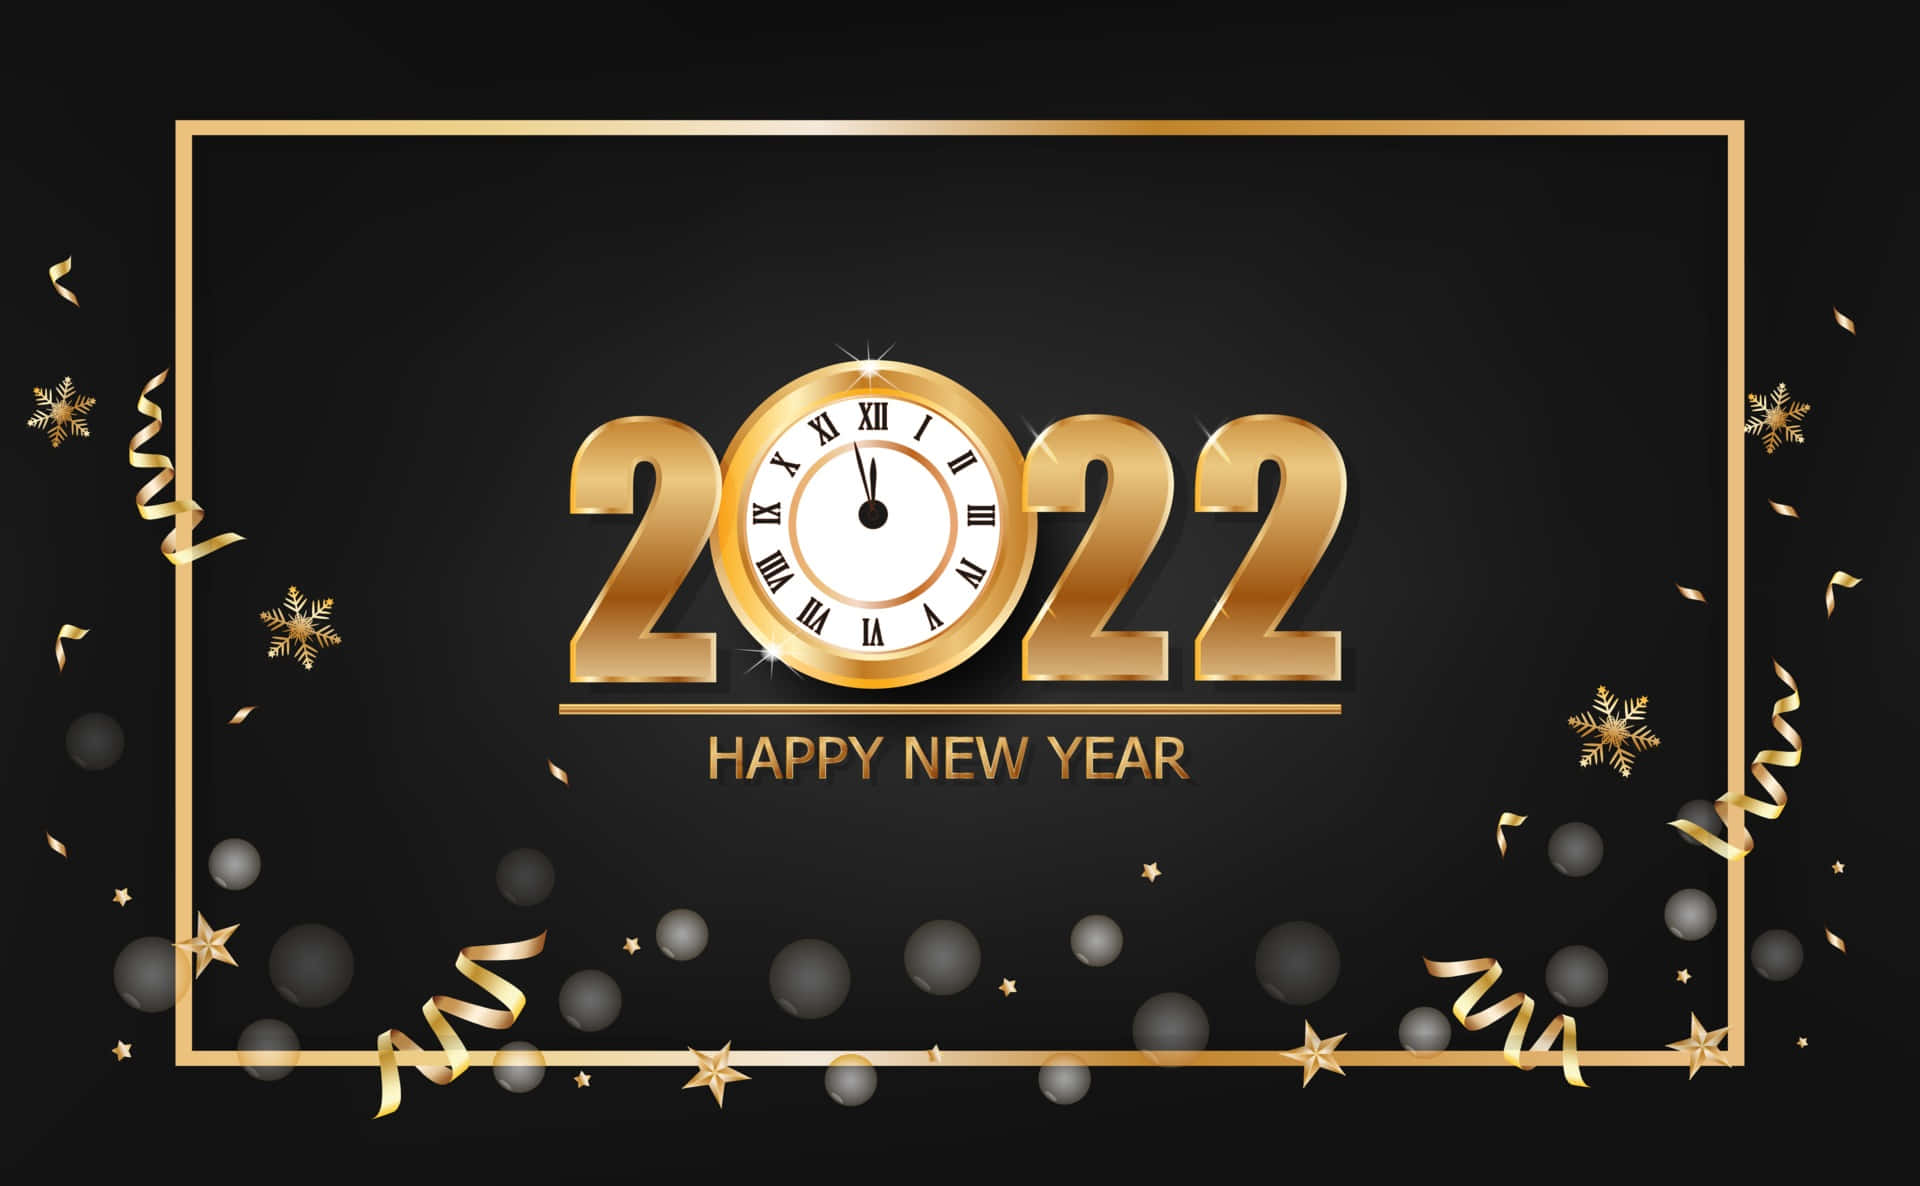 Wishing you a Happy New Year 2022!